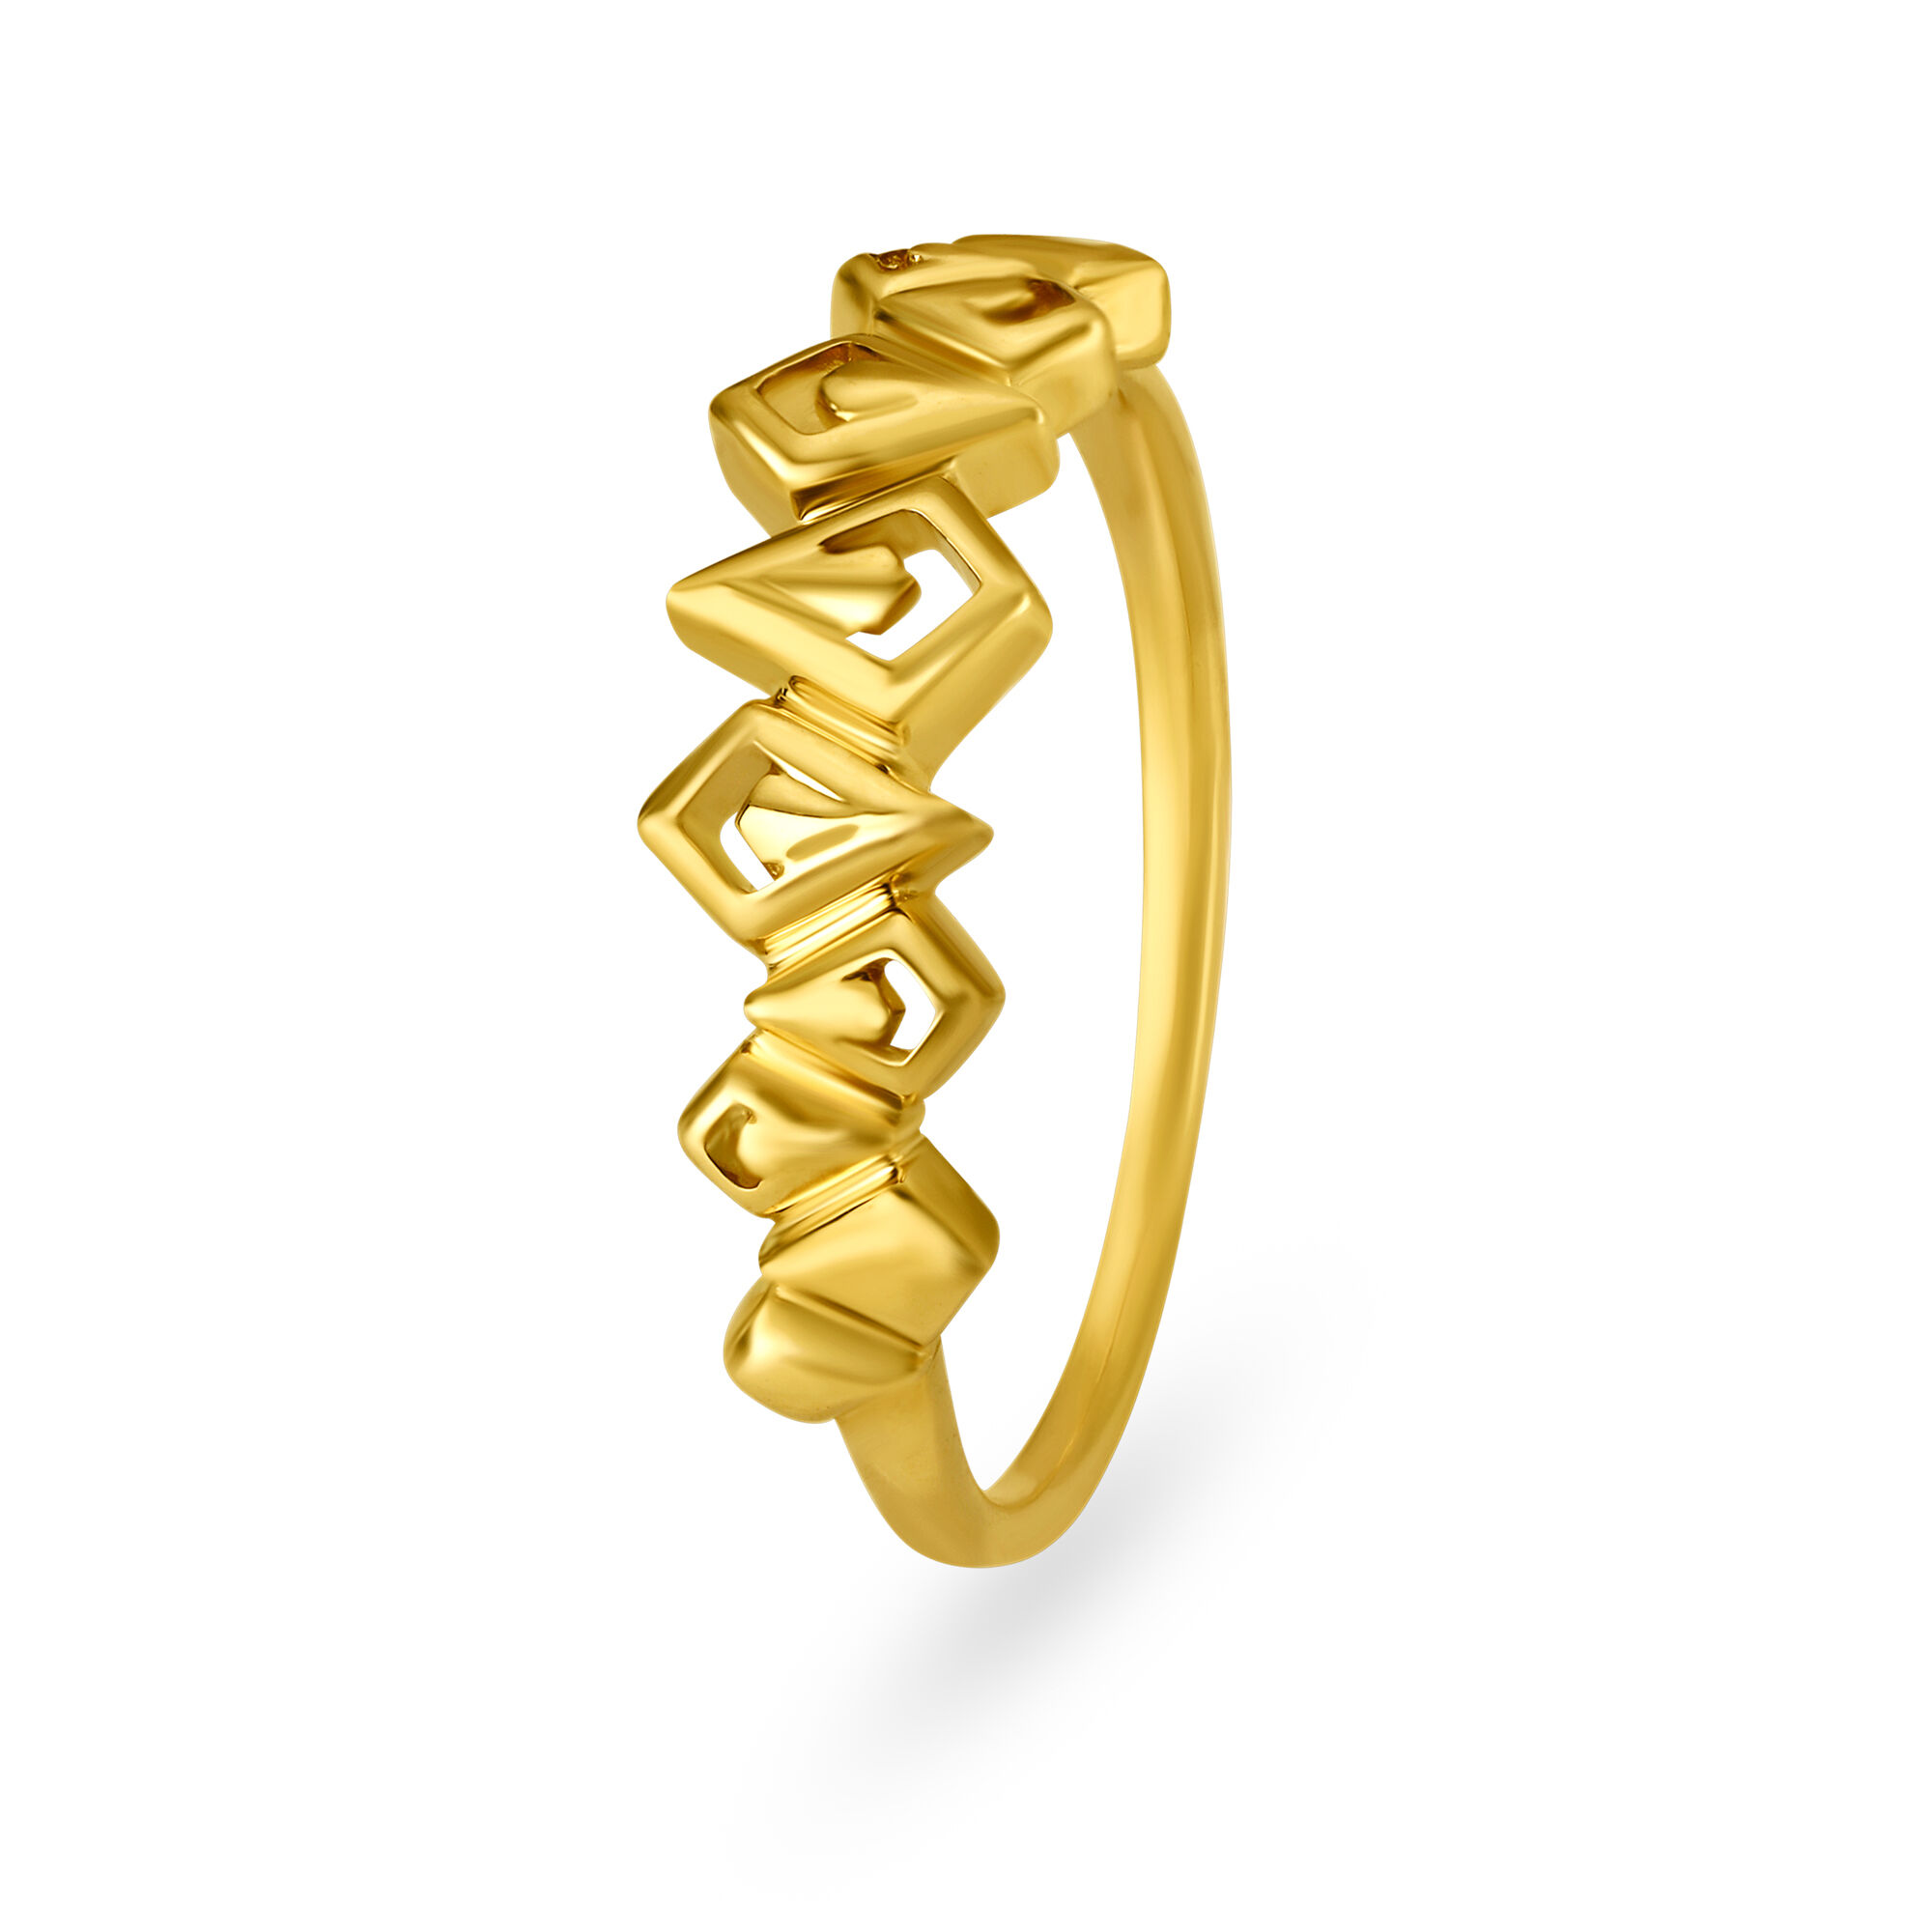 Tanishq 22KT Yellow Gold Finger Ring with Floral Design | Gold ring designs,  Gold jewelry fashion, Jewelry